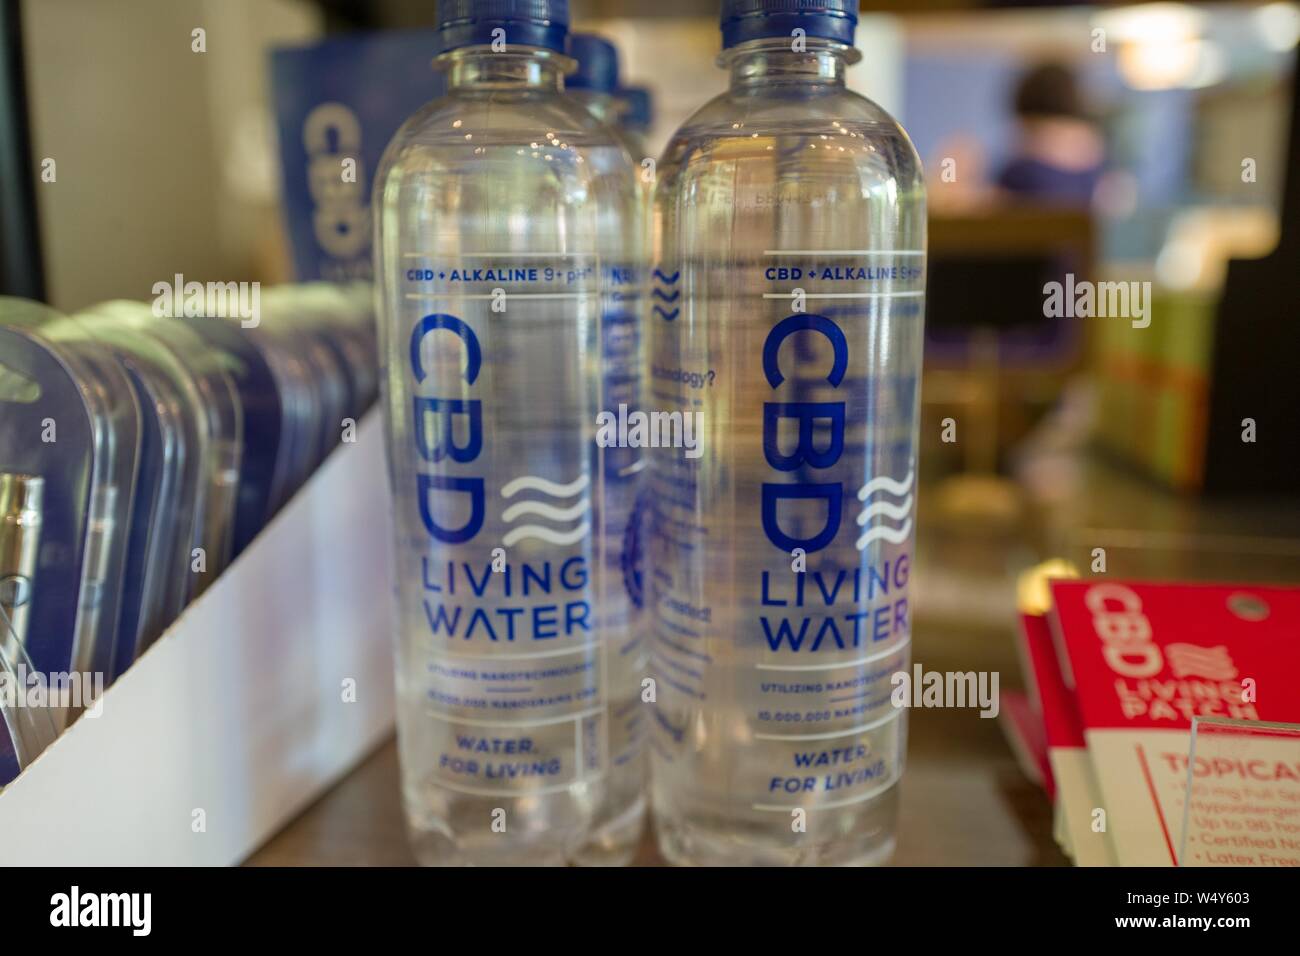 Water with nano-particles of Cannabidiol or CBD, derived from the Cannabis plant, are displayed on the shelf of a store in Walnut Creek, California, April 26, 2019. () Stock Photo